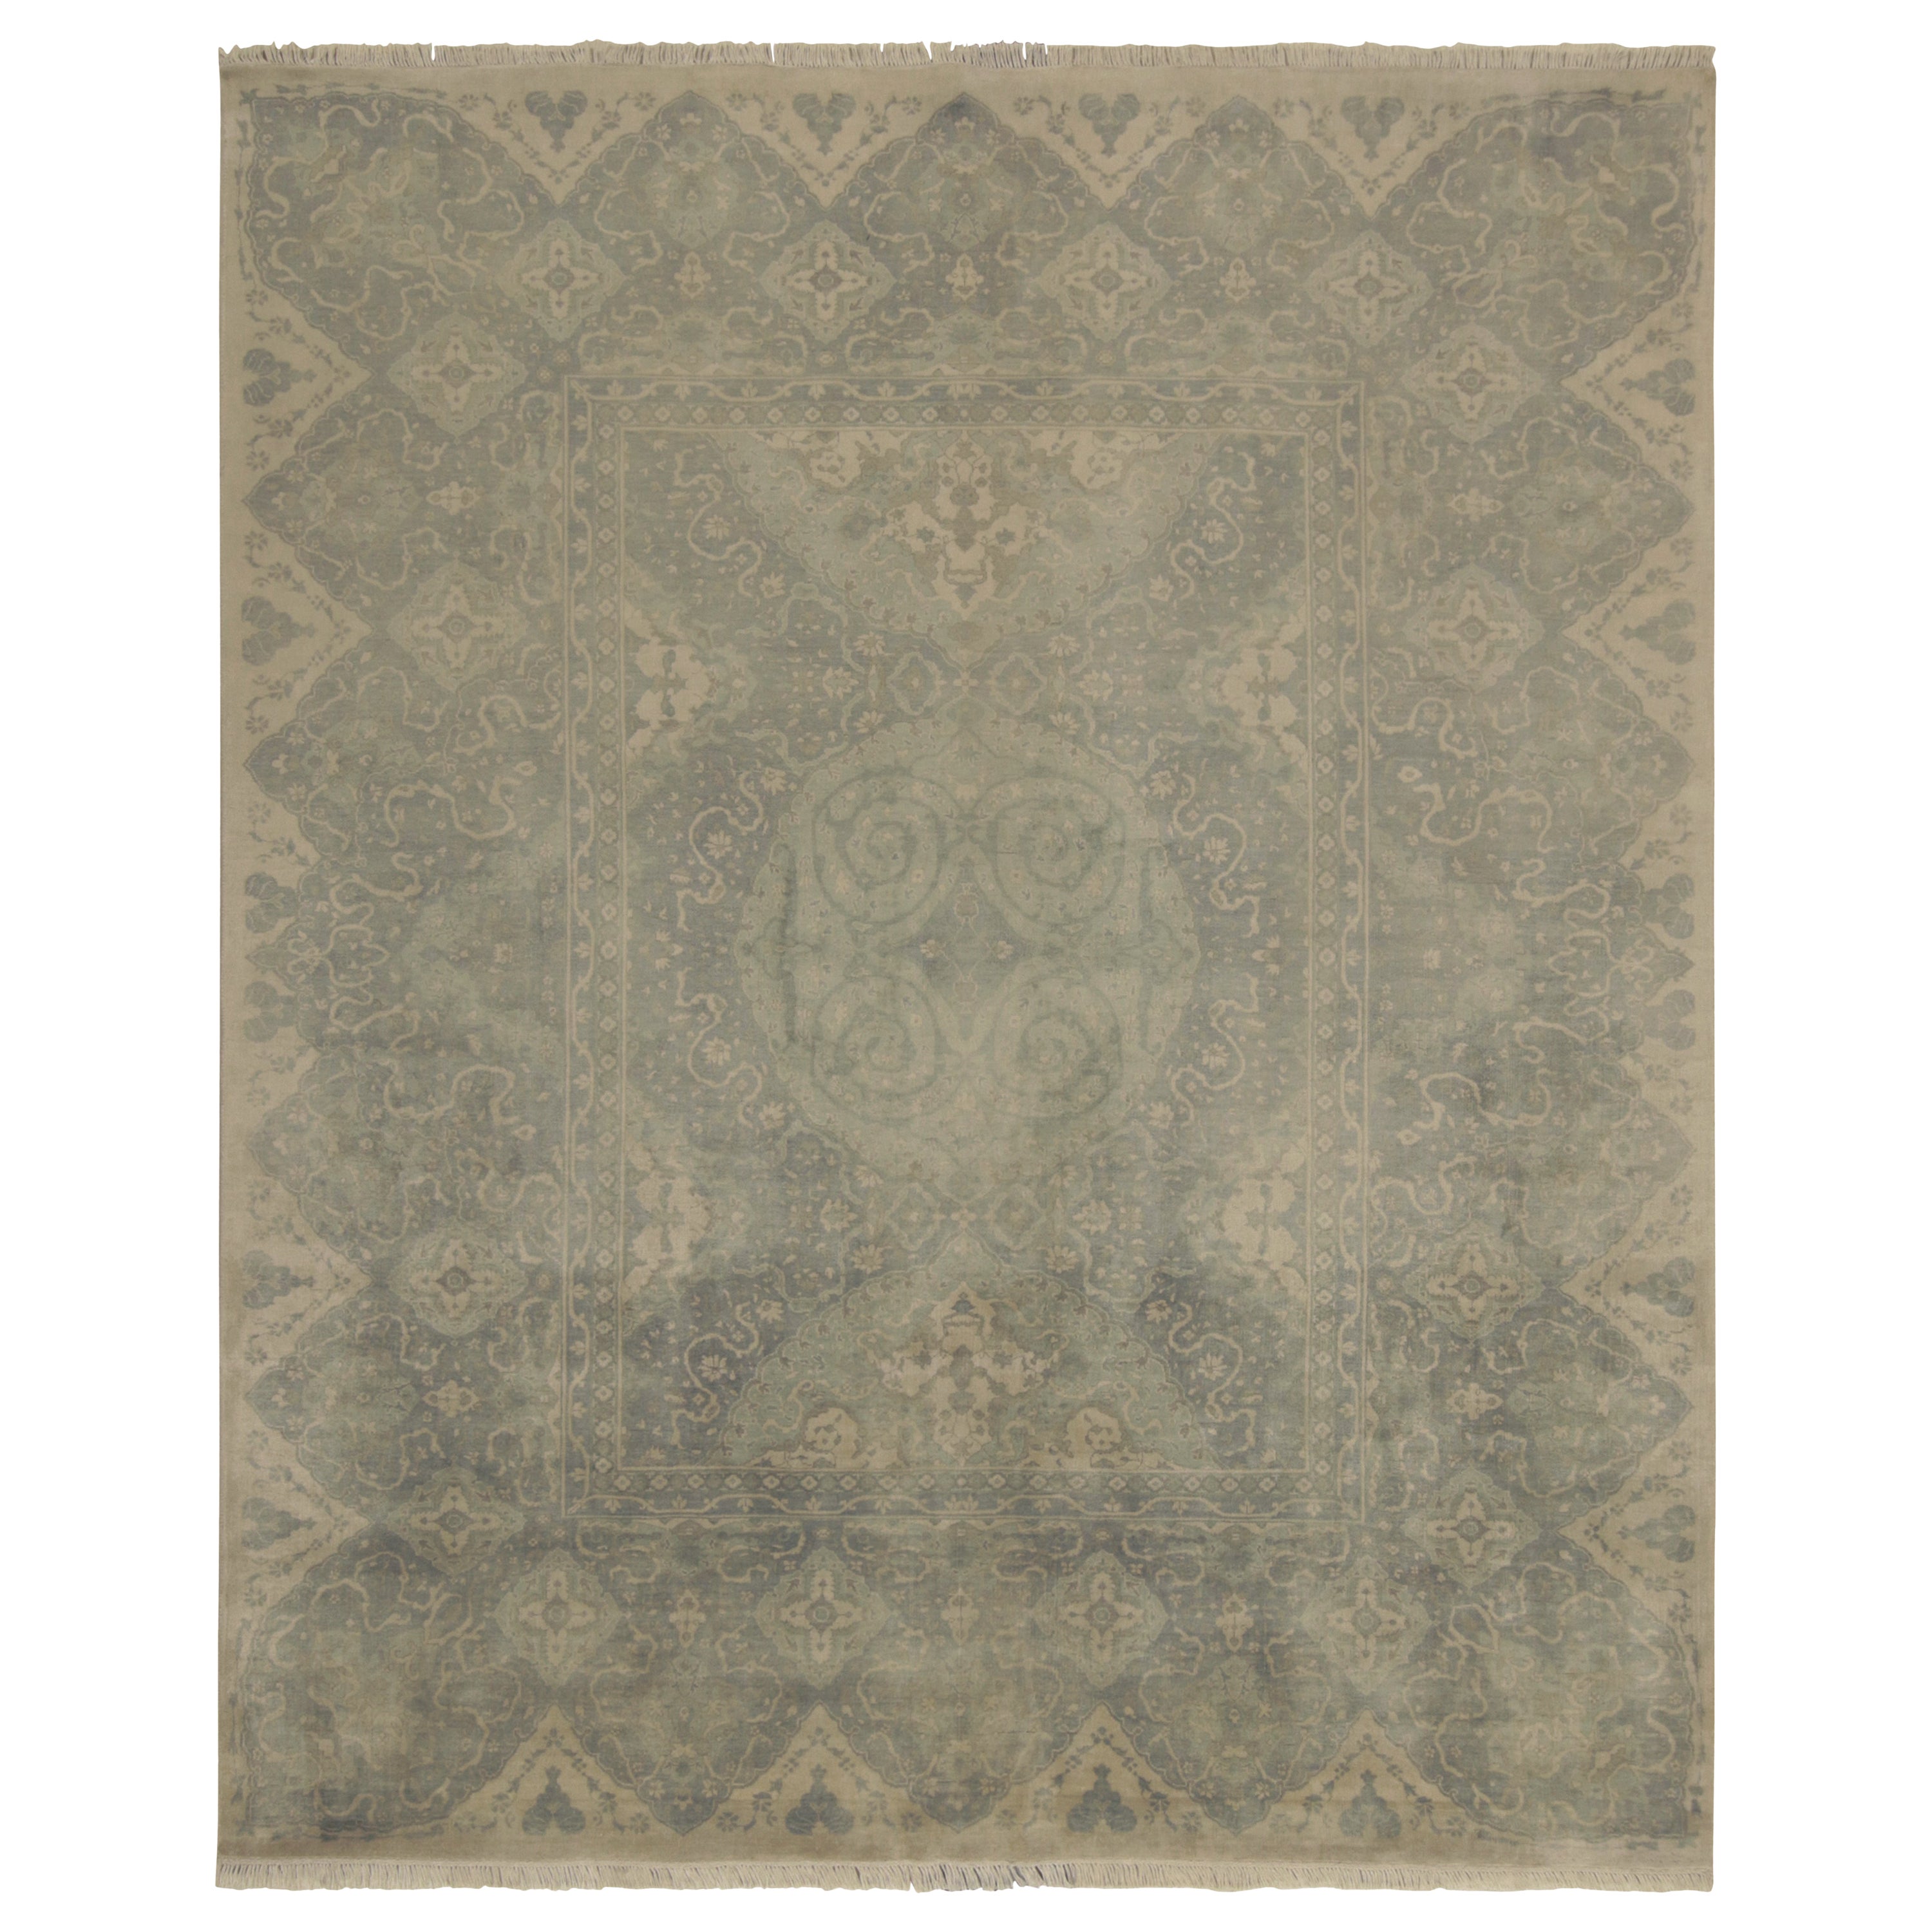 Rug & Kilim’s Classic Persian style rug with Blue and Ivory Floral Pattern